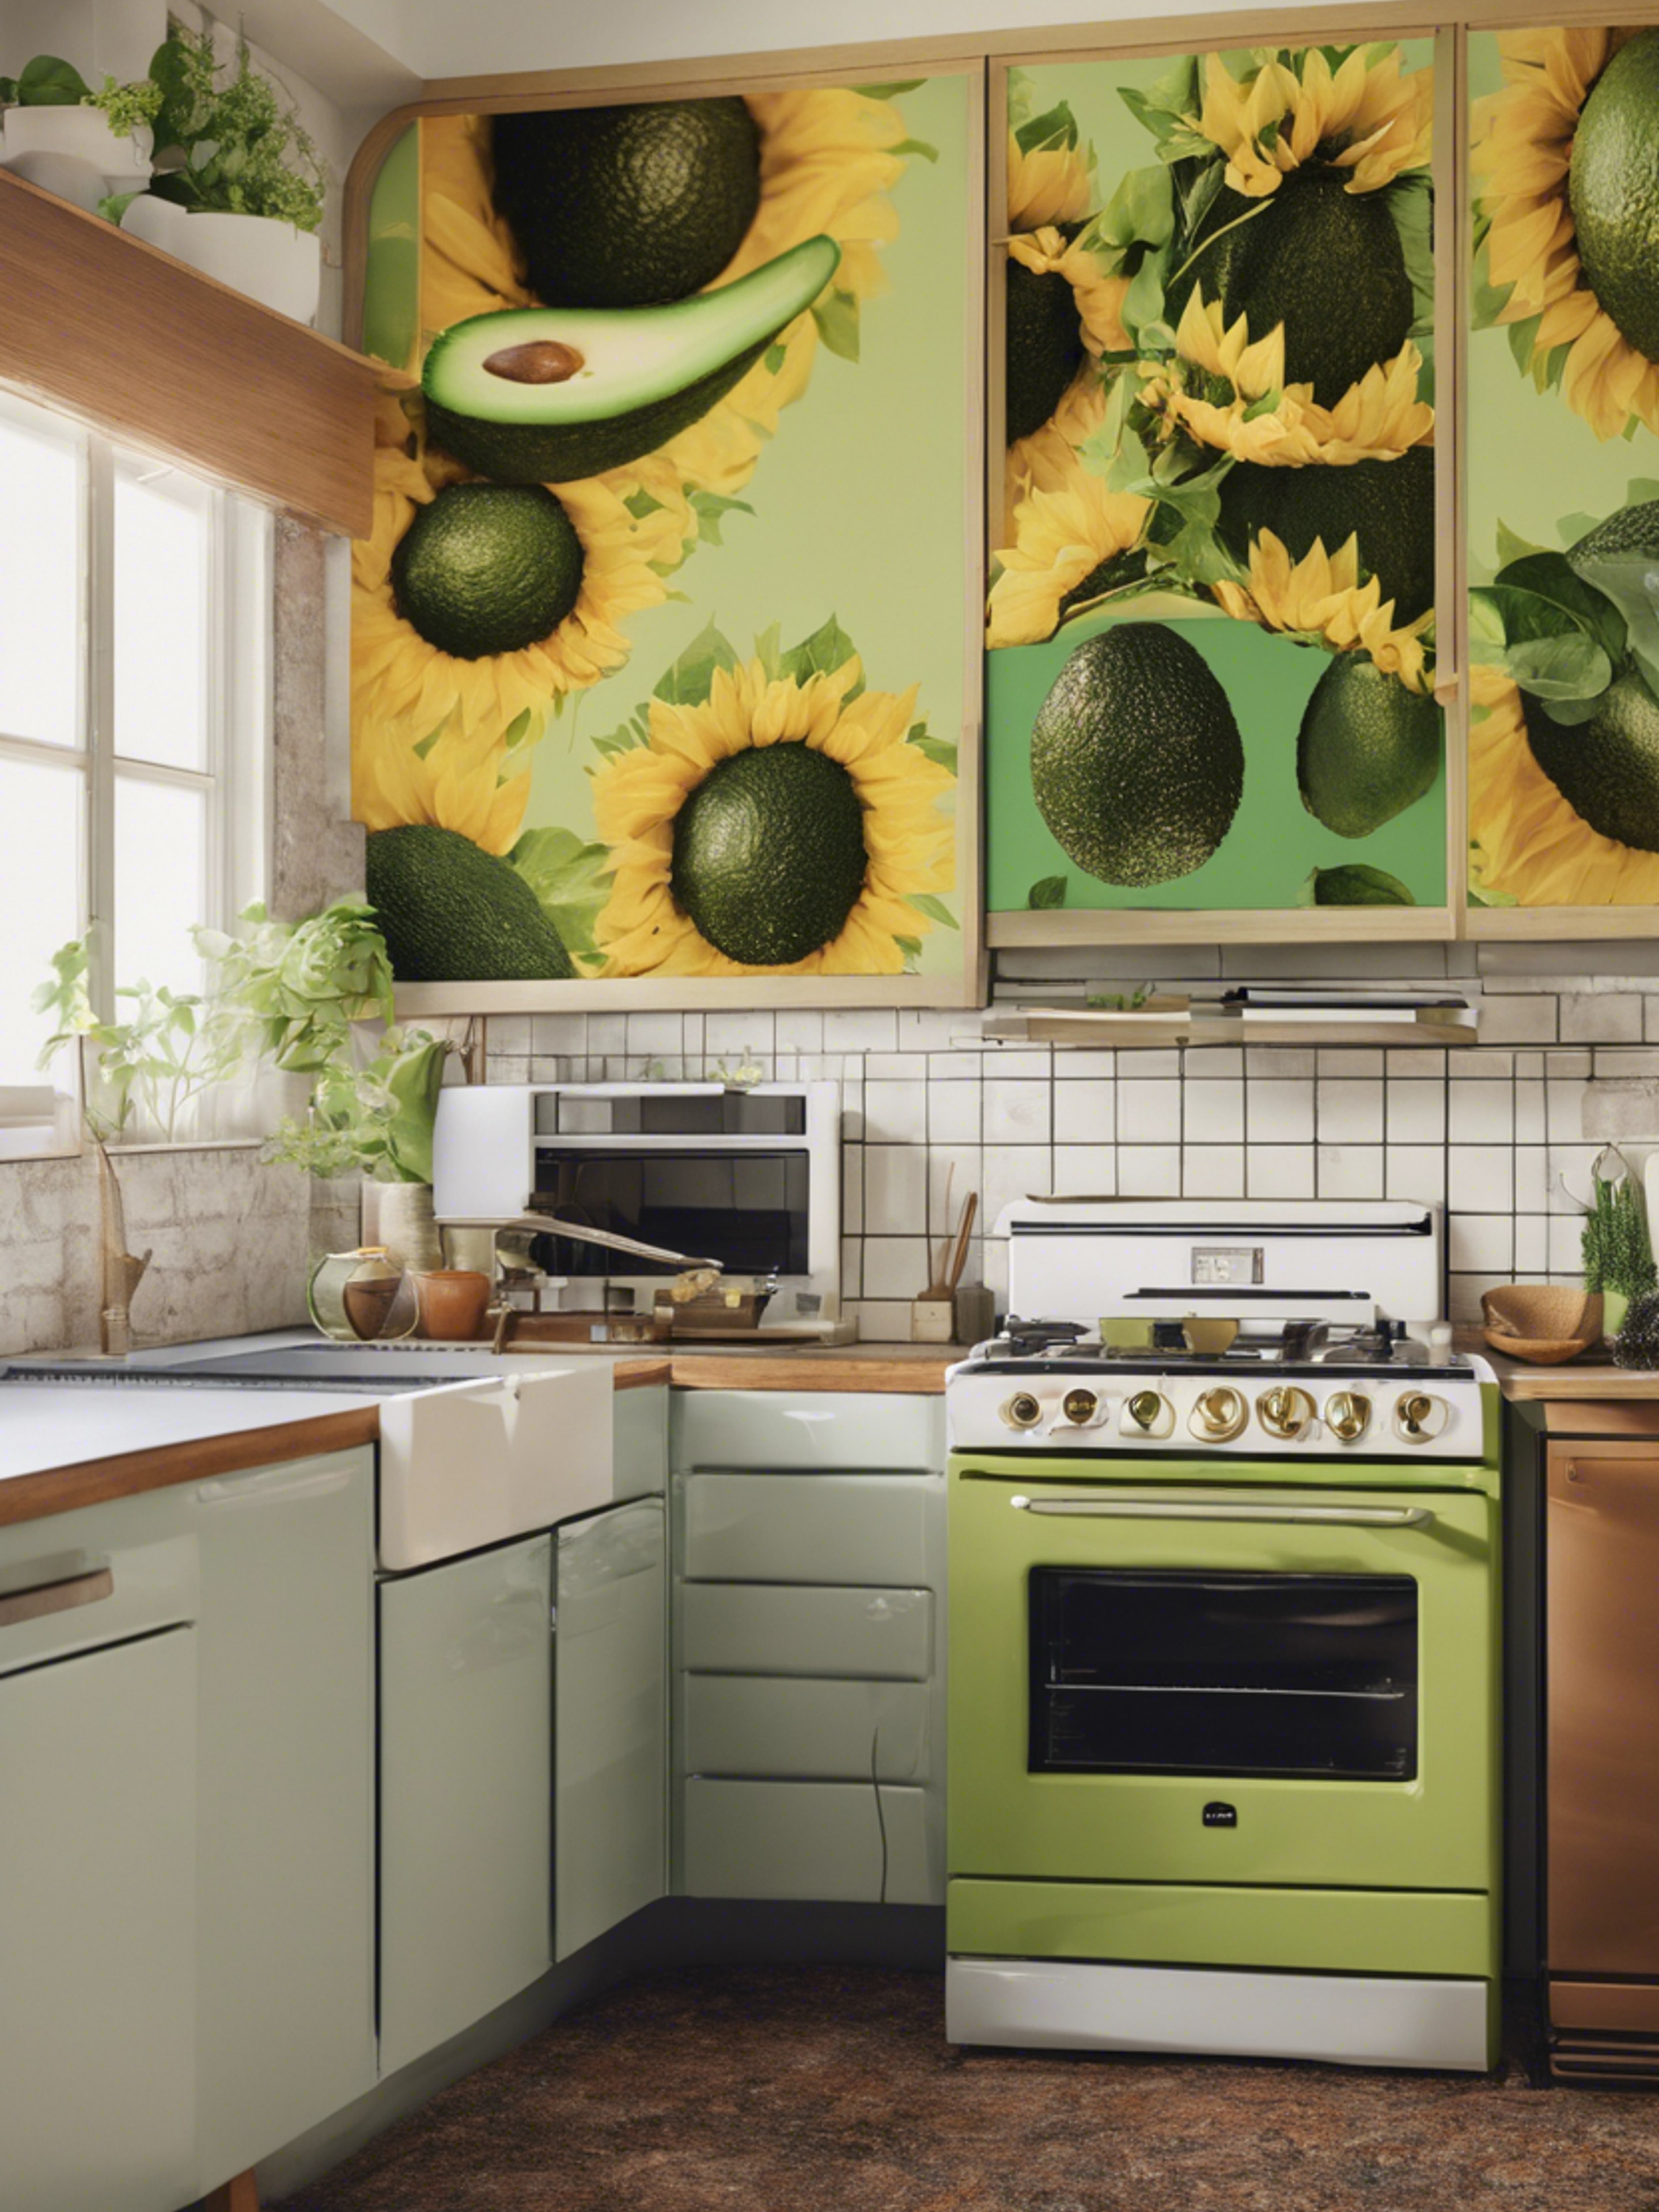 A 70s kitchen with avocado green appliances and oversized sunflower prints Тапет[58674ee3cd464da7b0a1]